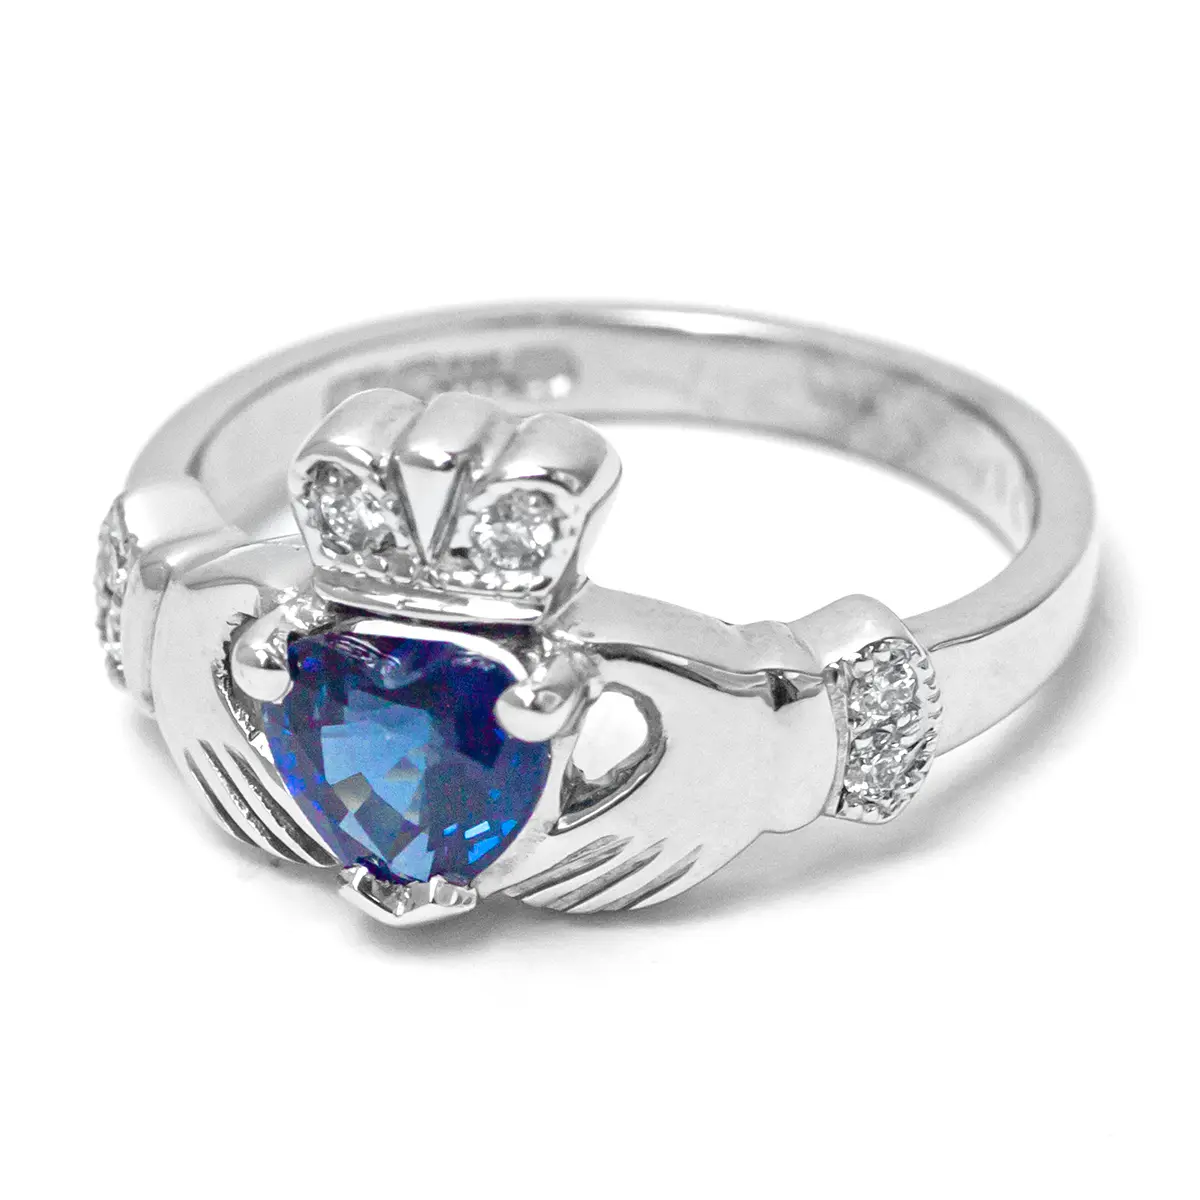 Heartshape Sapphire And Diamond White Gold Claddagh Engagement Ring...